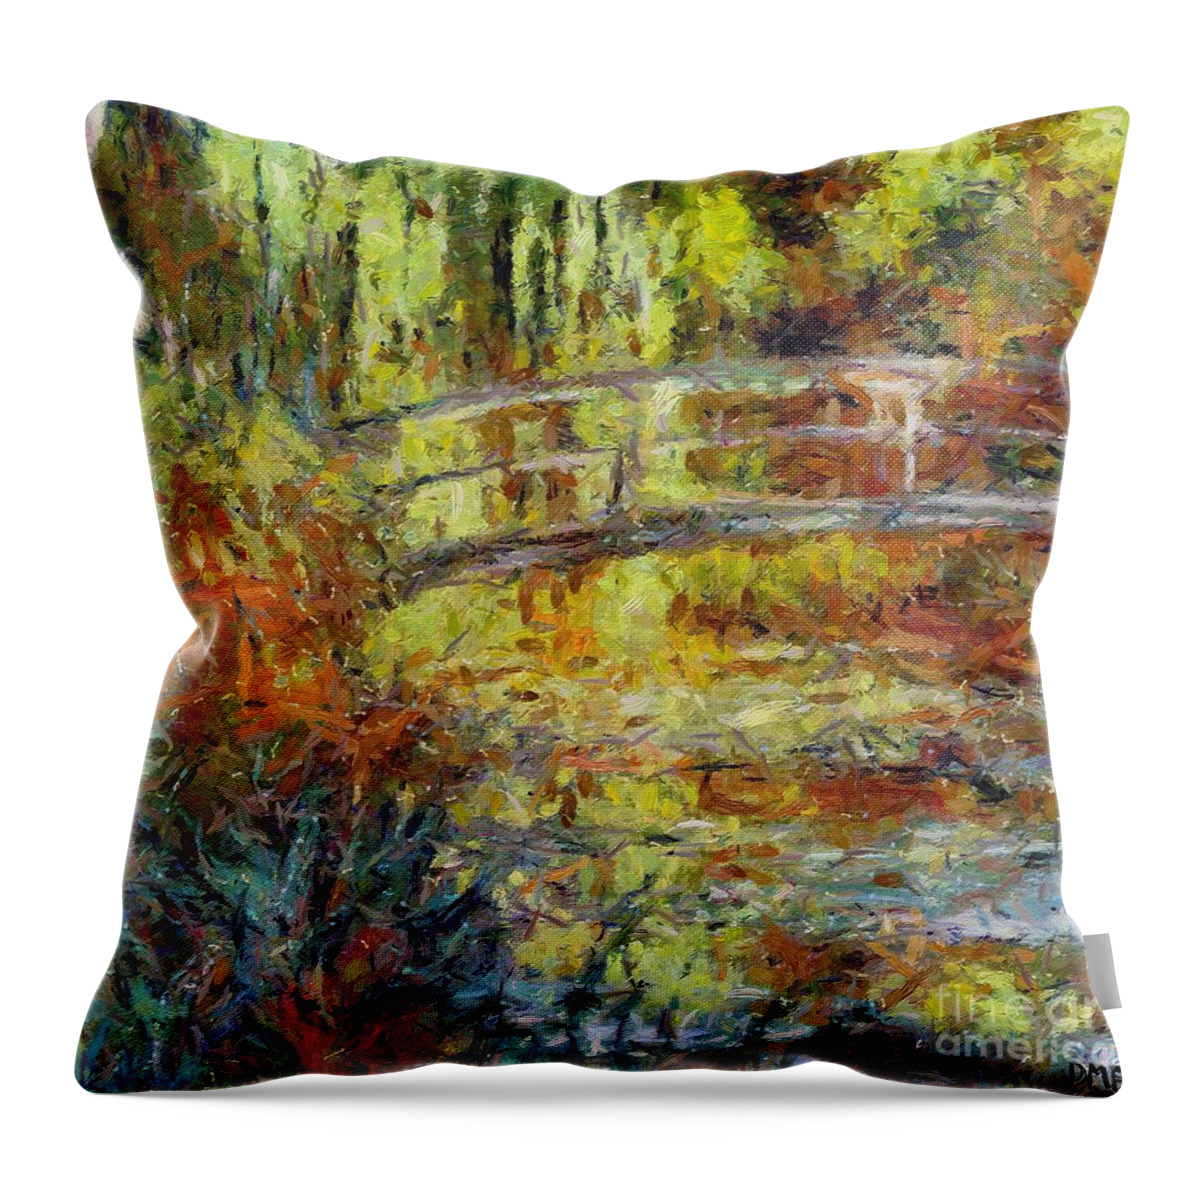 Landscapes Throw Pillow featuring the painting Monet's Japanese Bridge by Dragica Micki Fortuna